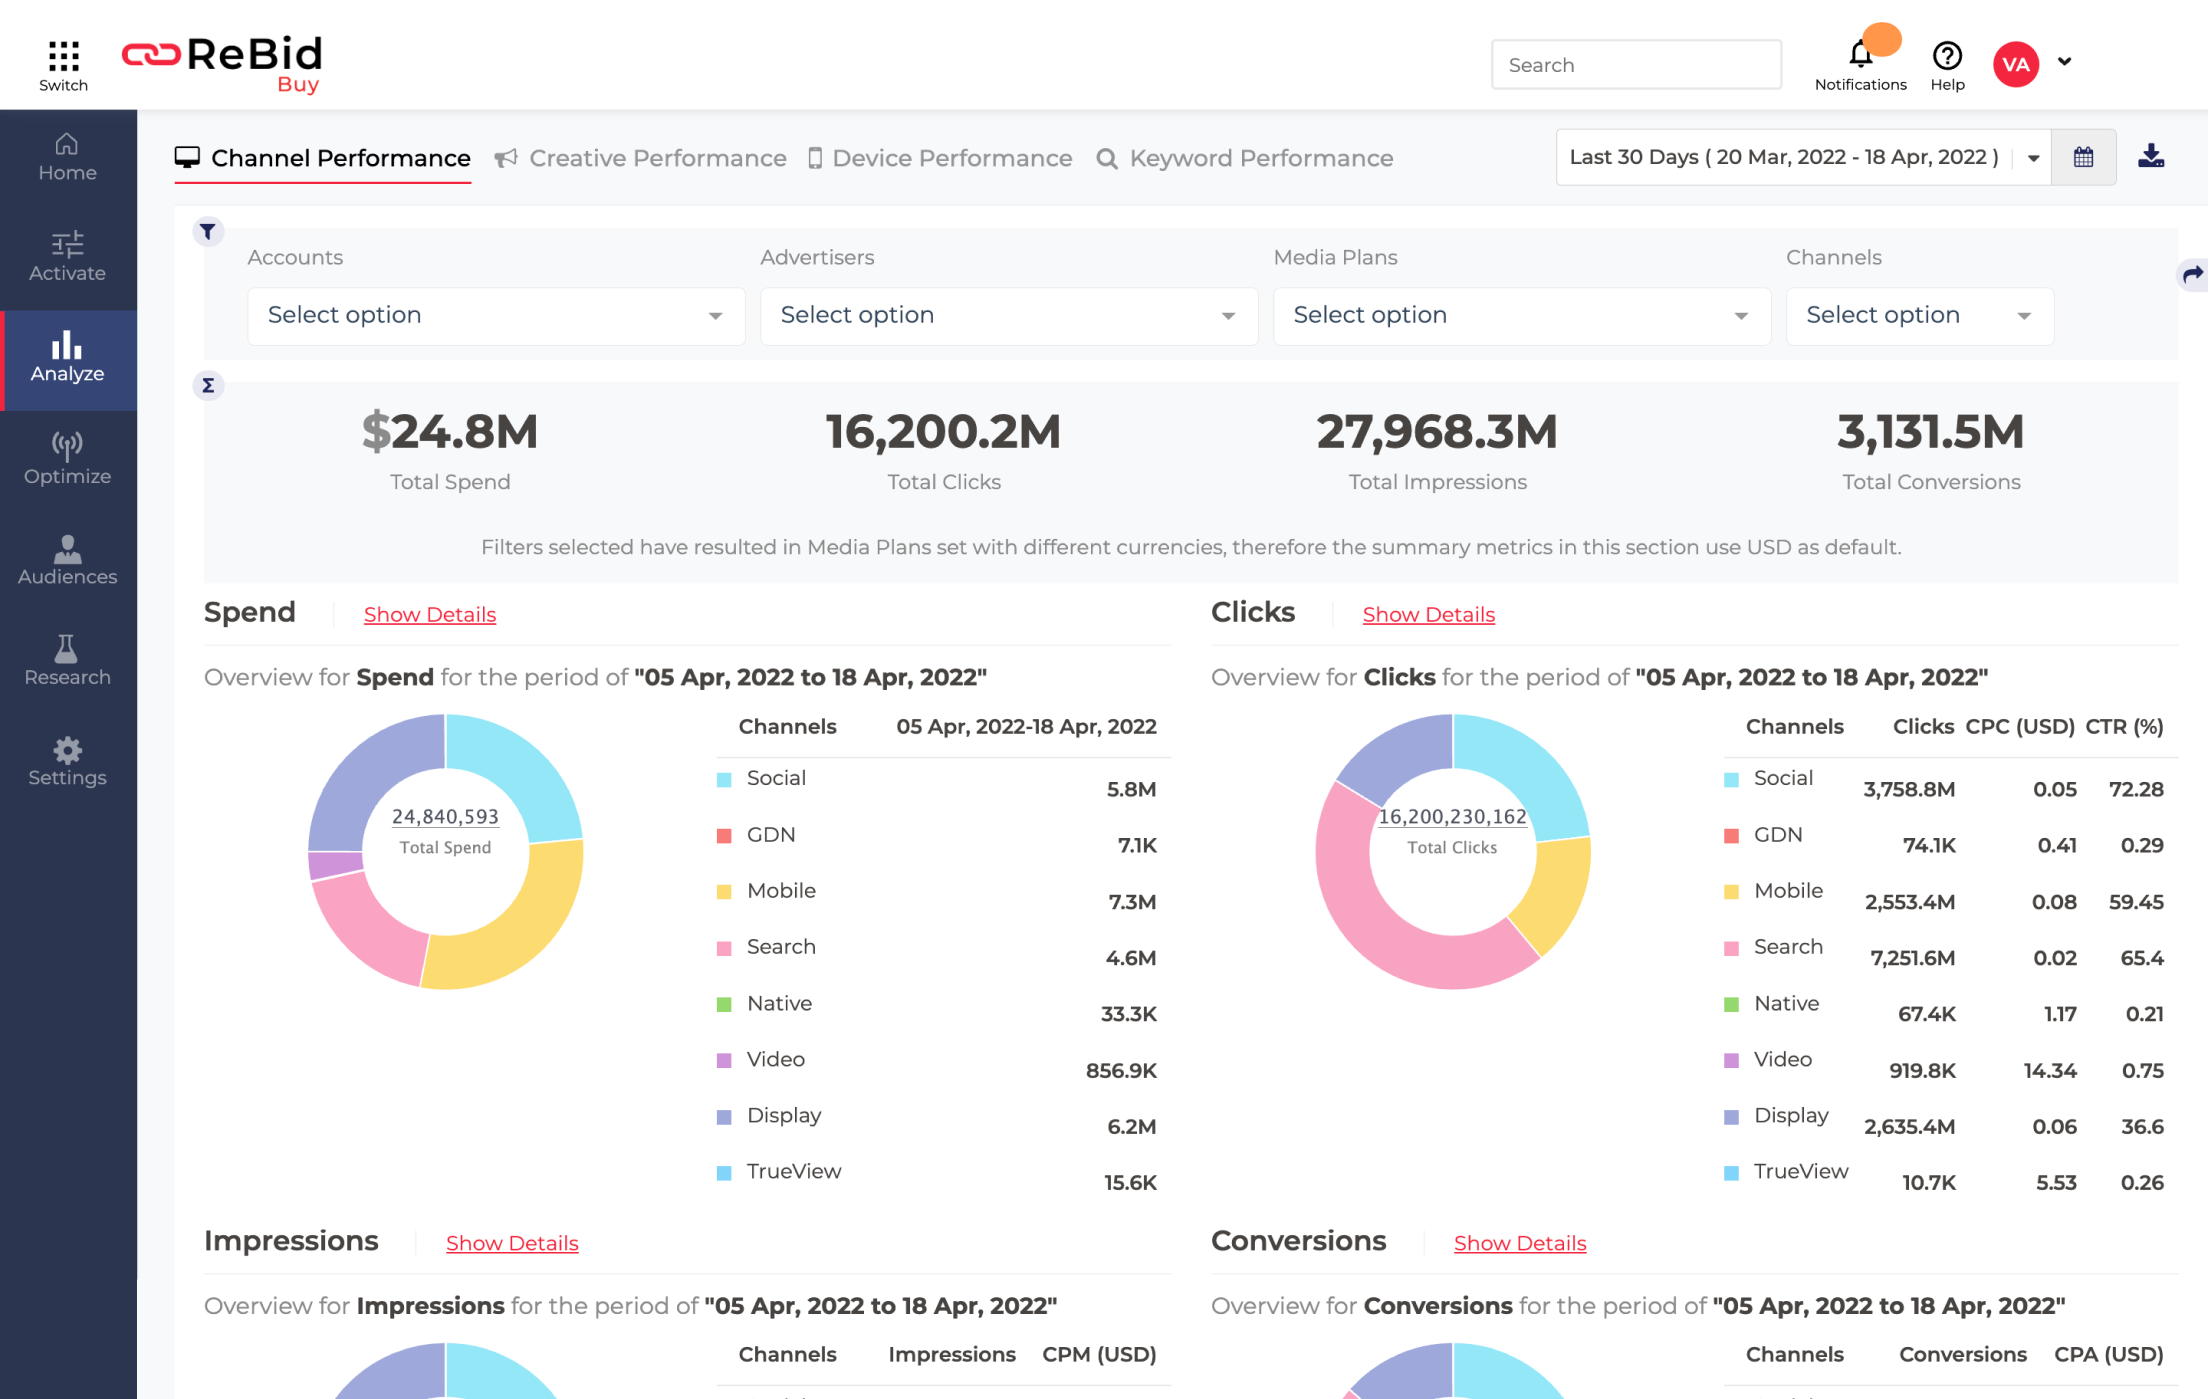 Get CXO view dashboards with key insights across Channel, Creative, Device and Keyword Performance